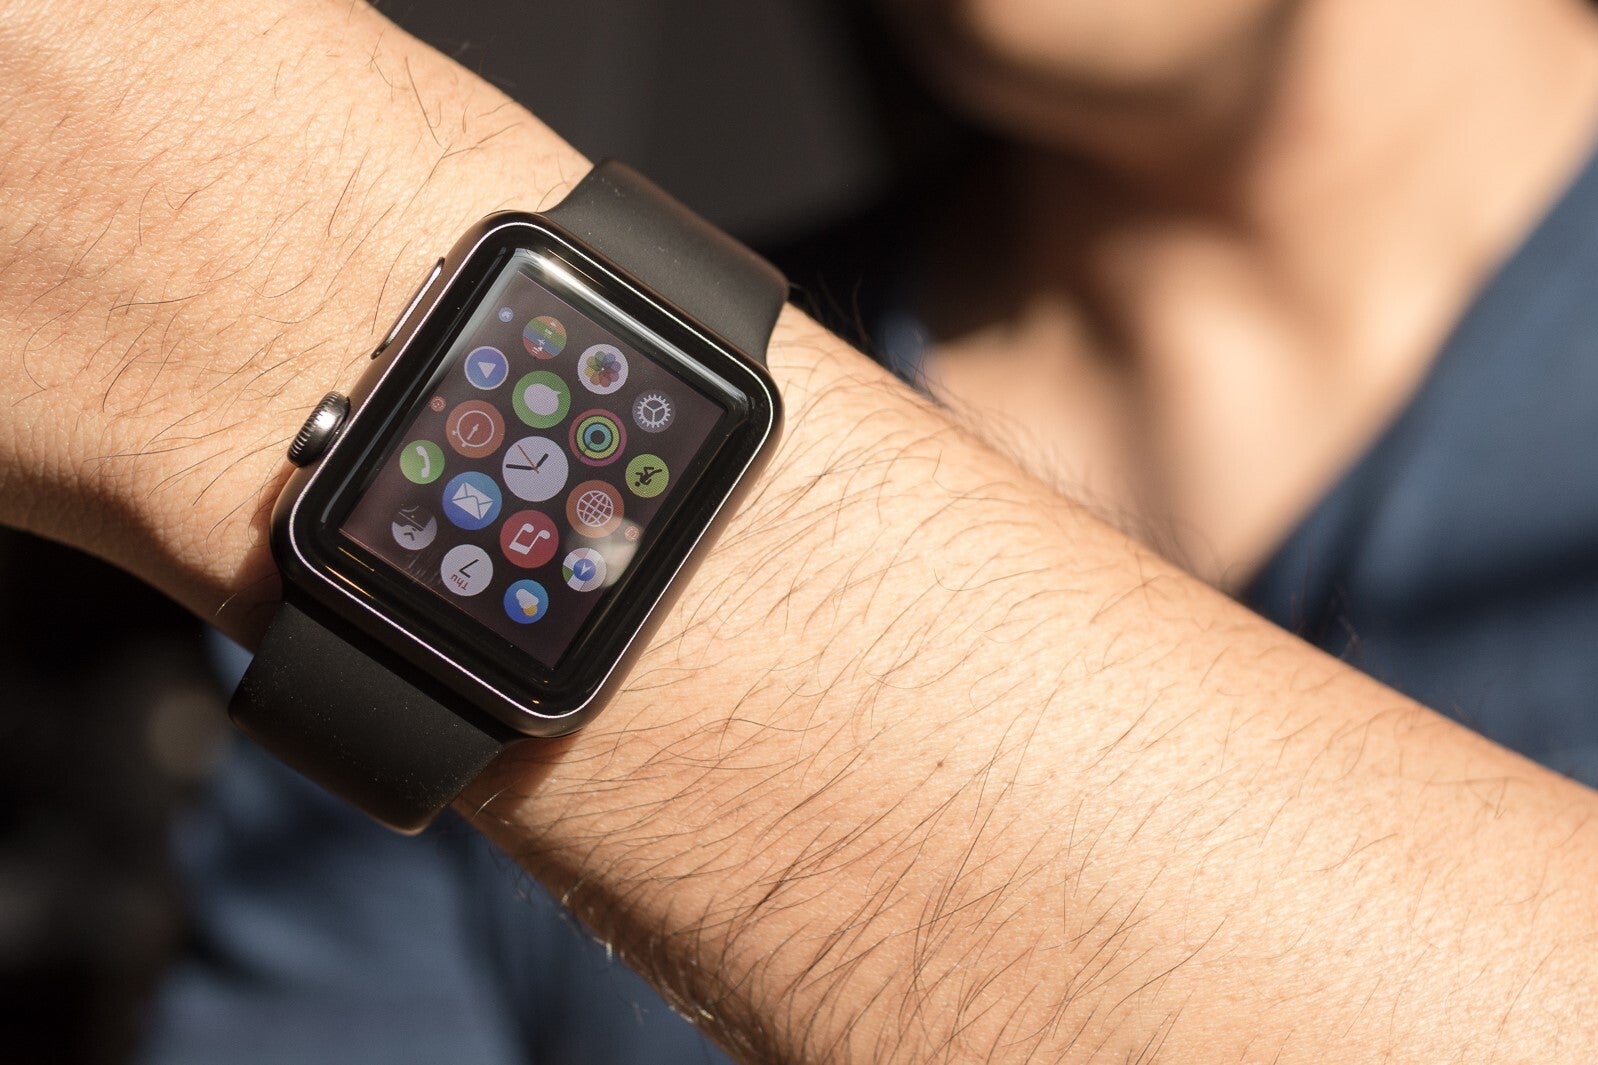 The original Apple Watch - $10,000+ Apple Watch Edition sales plunged after just two weeks